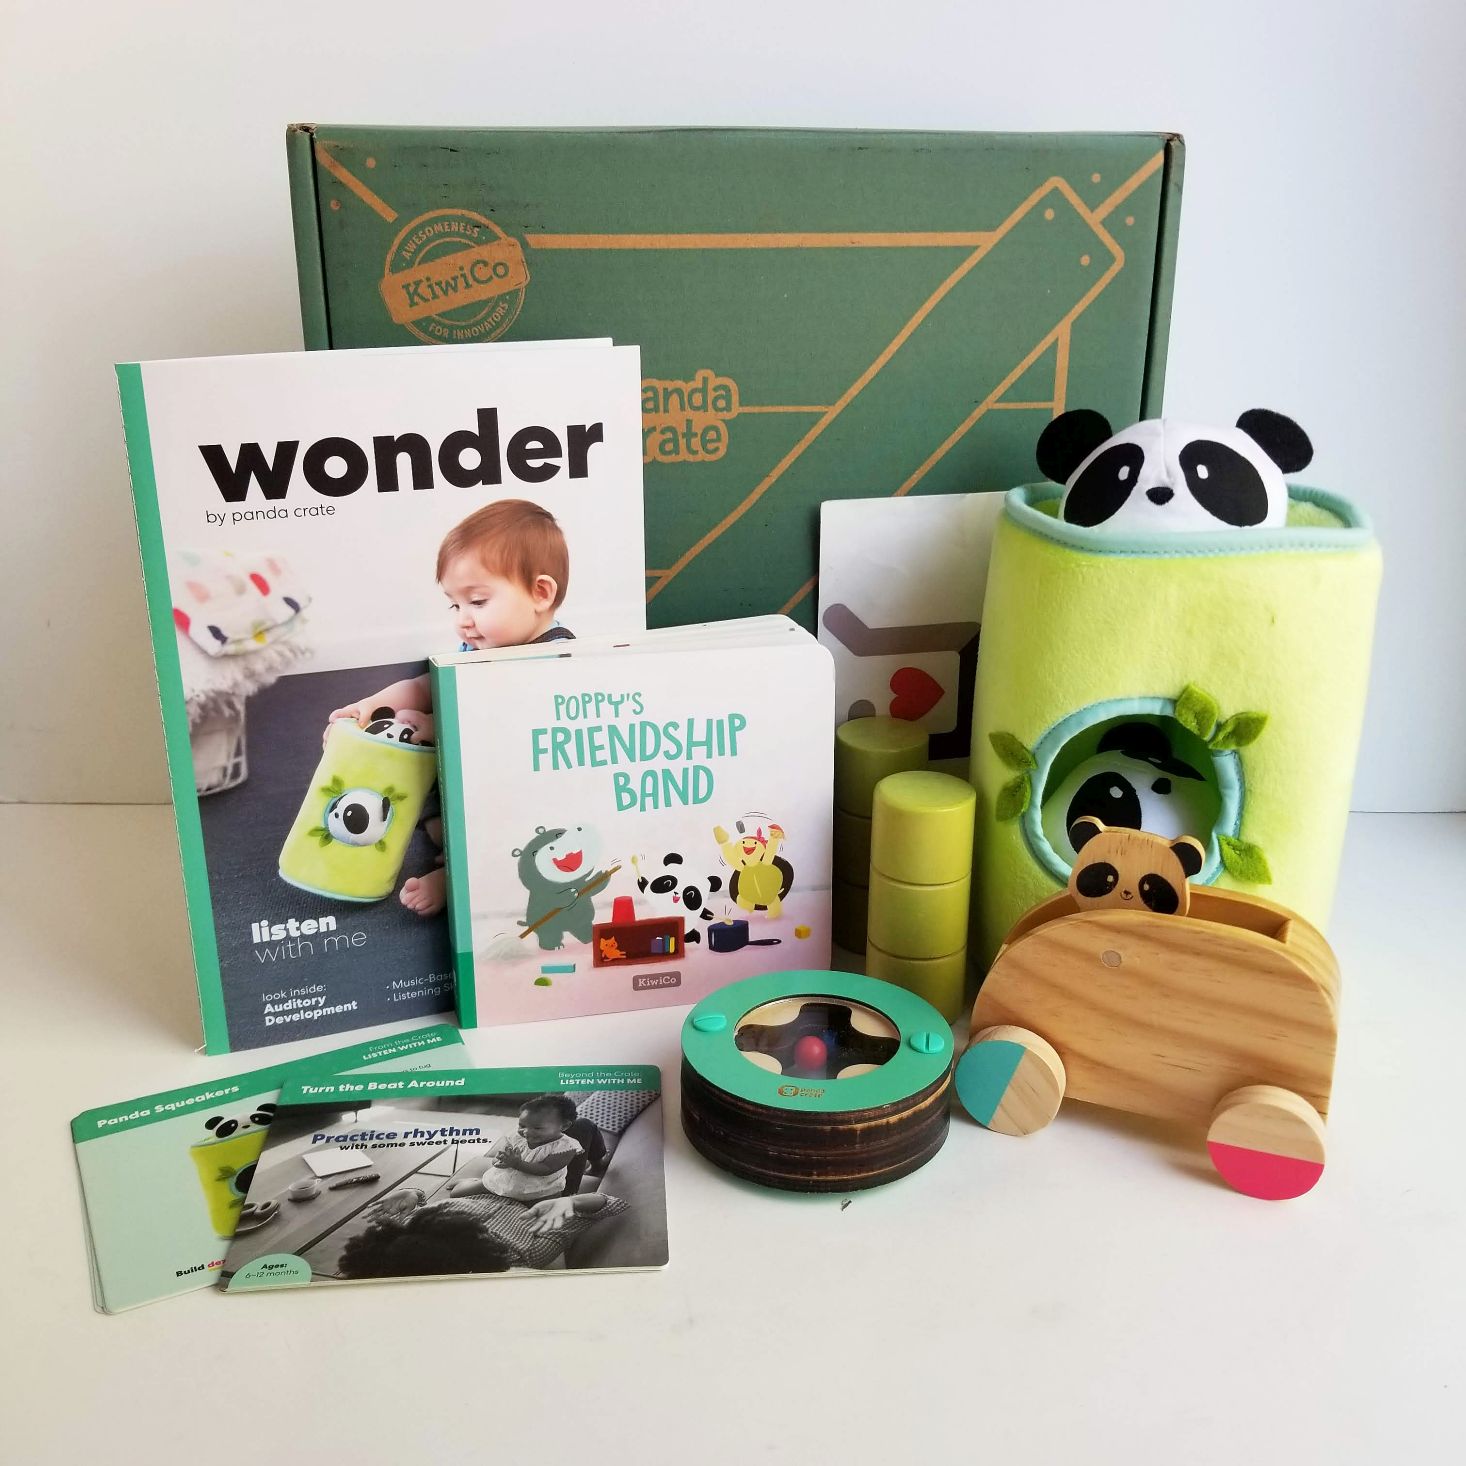 Panda Crate Listen With Me all items